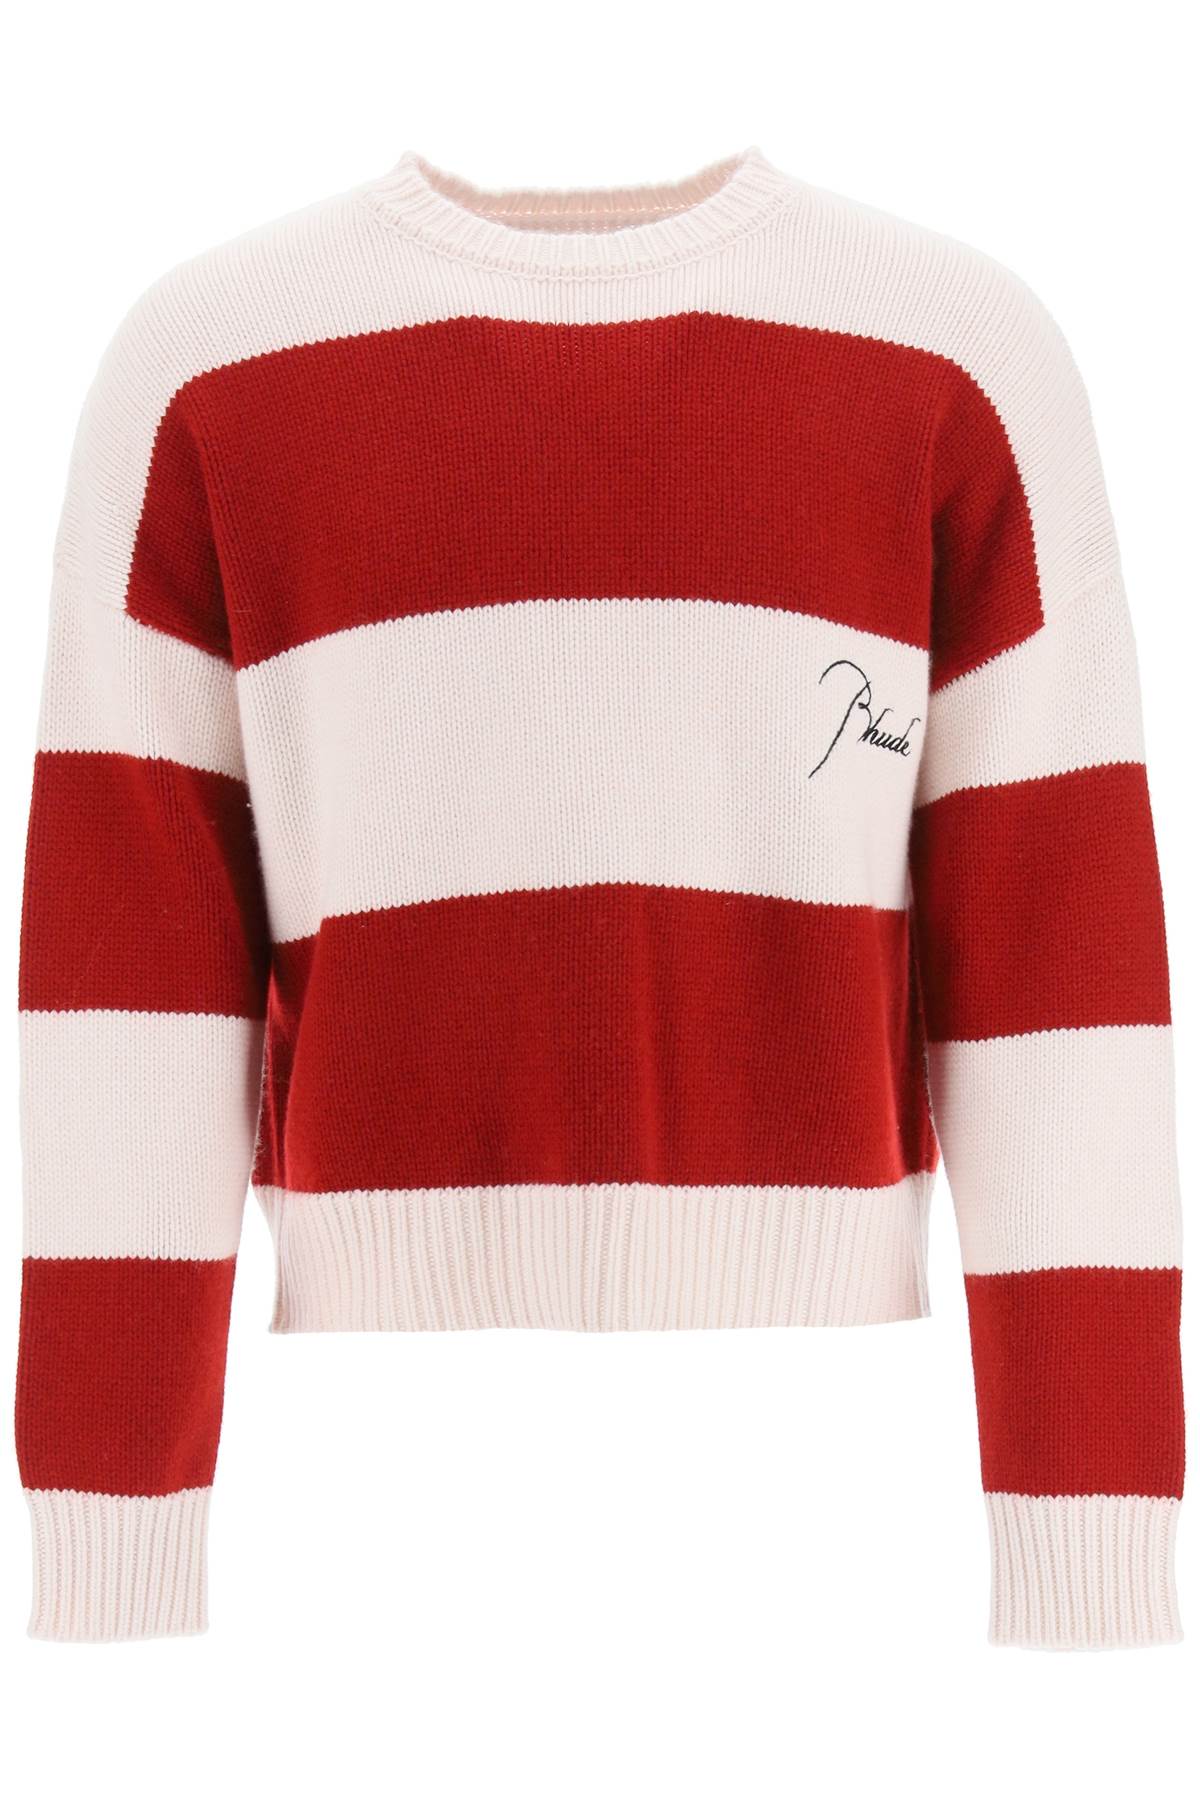 Rhude Striped Sweater With Embroidered Logo